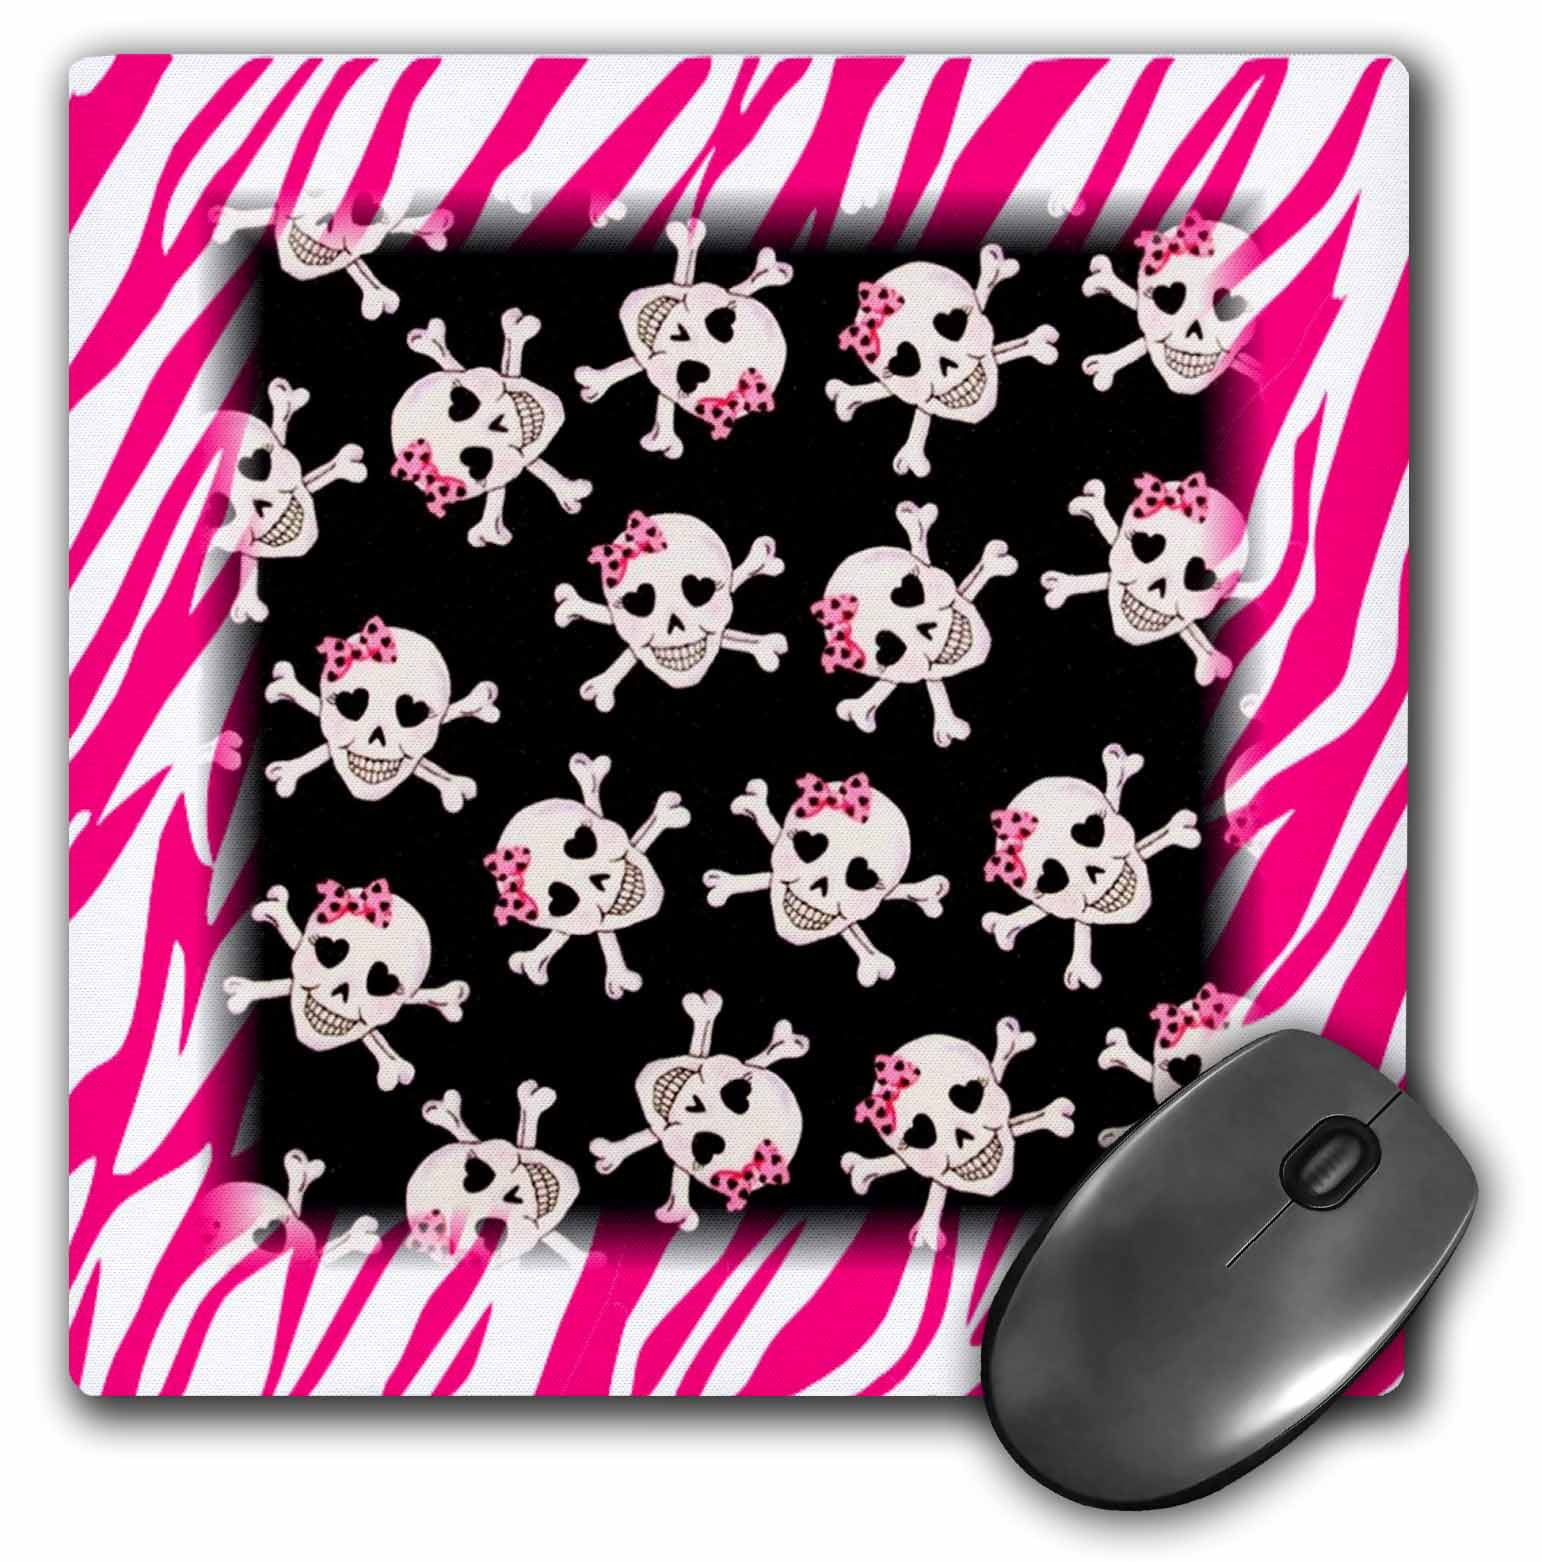 3dRose cst_61793_2 Cute Black Skulls with Bows on Pink Zebra-Soft Coasters Set of 8